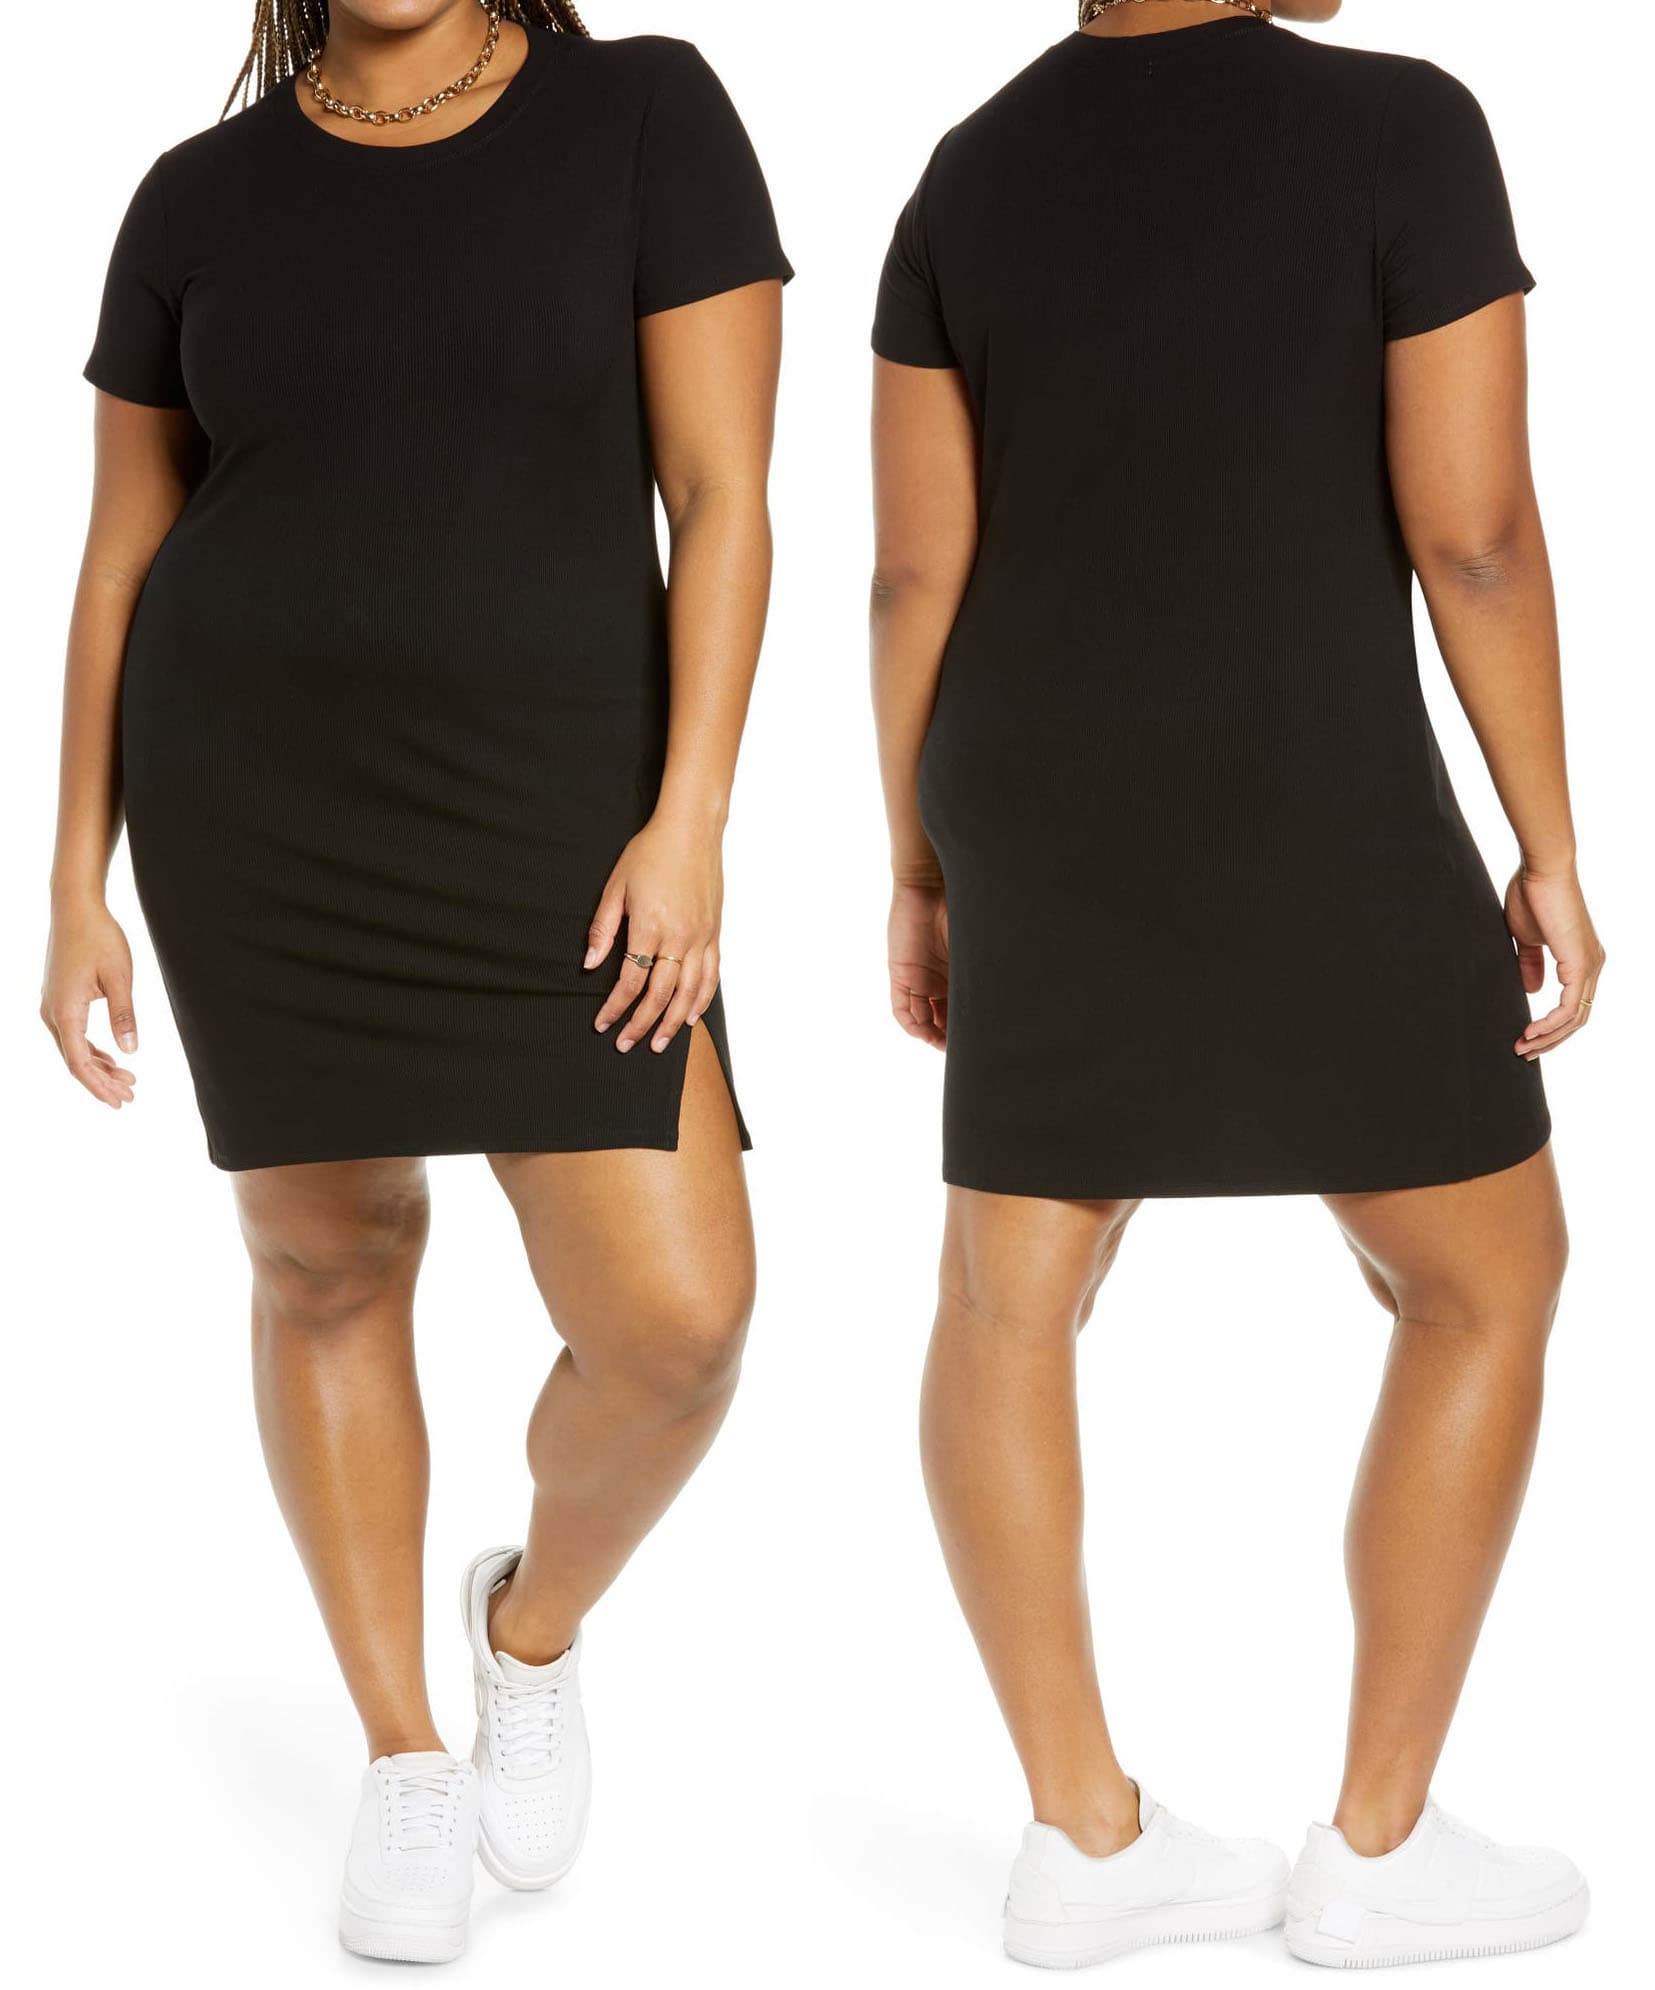 Perfect a casual-cool vibe in BP.'s short-sleeved rib t-shirt dress, made from stretchy rayon-spandex